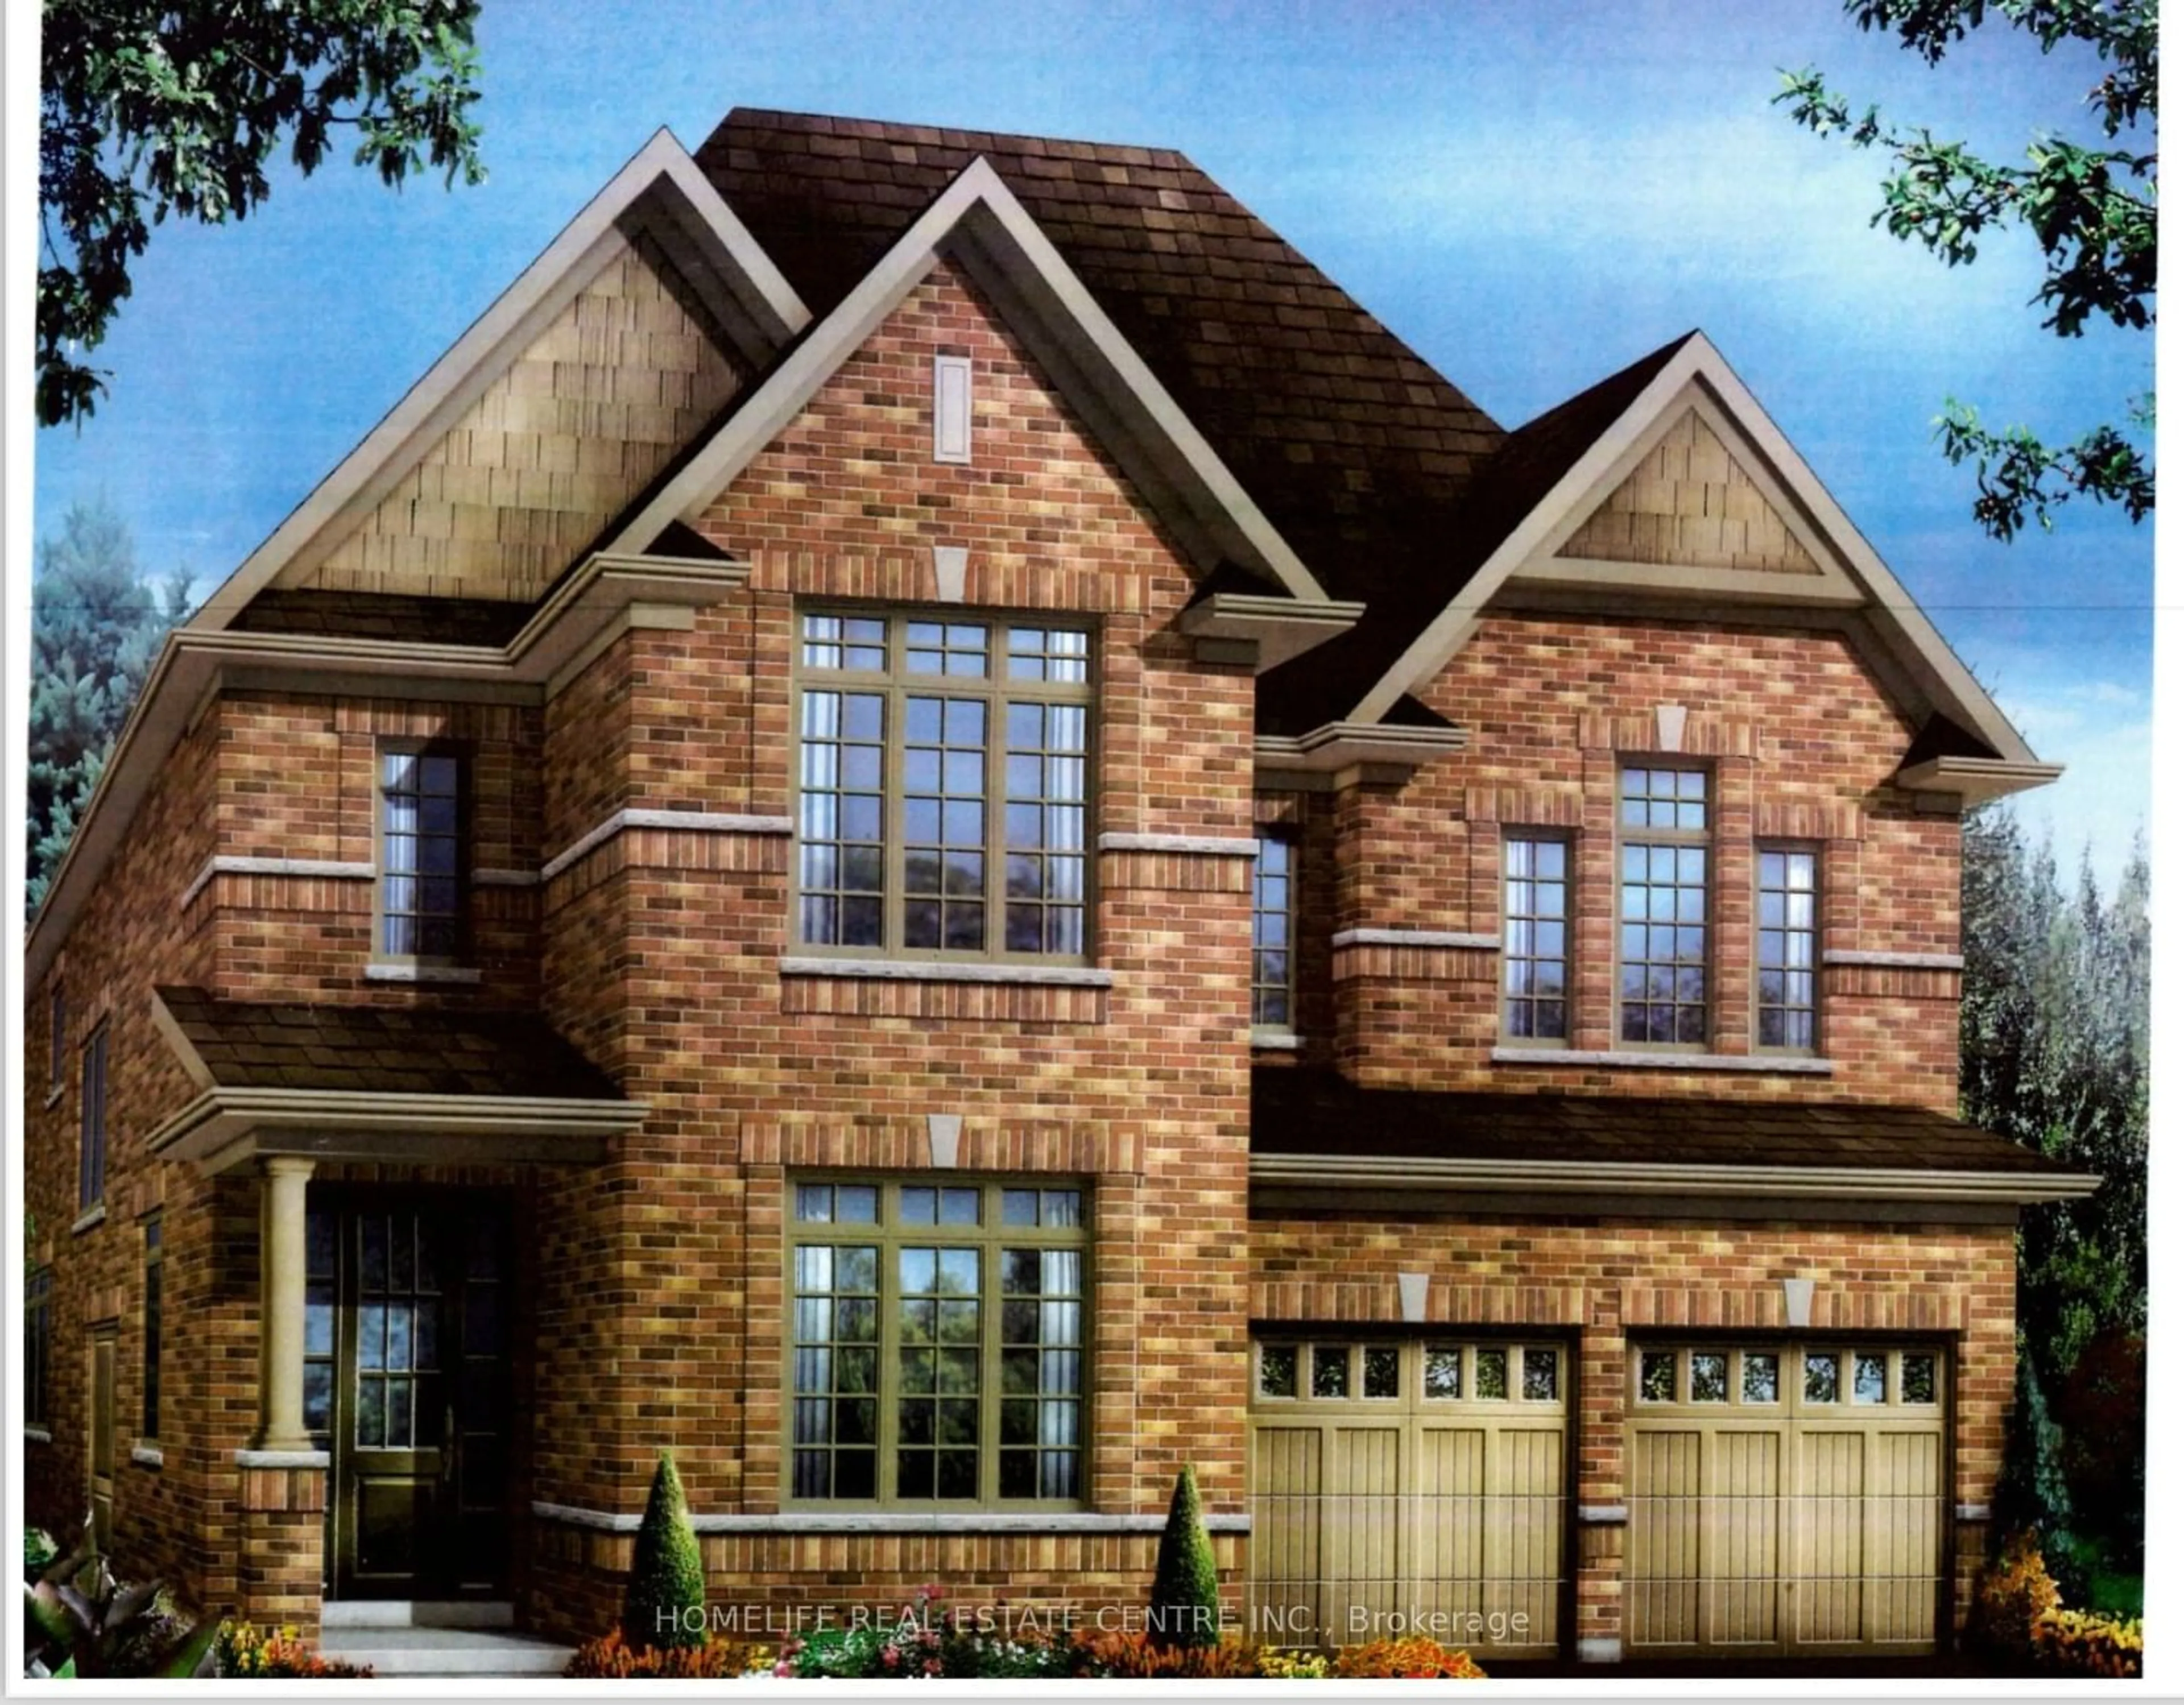 Home with brick exterior material for 27 Claremont Dr, Brampton Ontario L6R 0B8